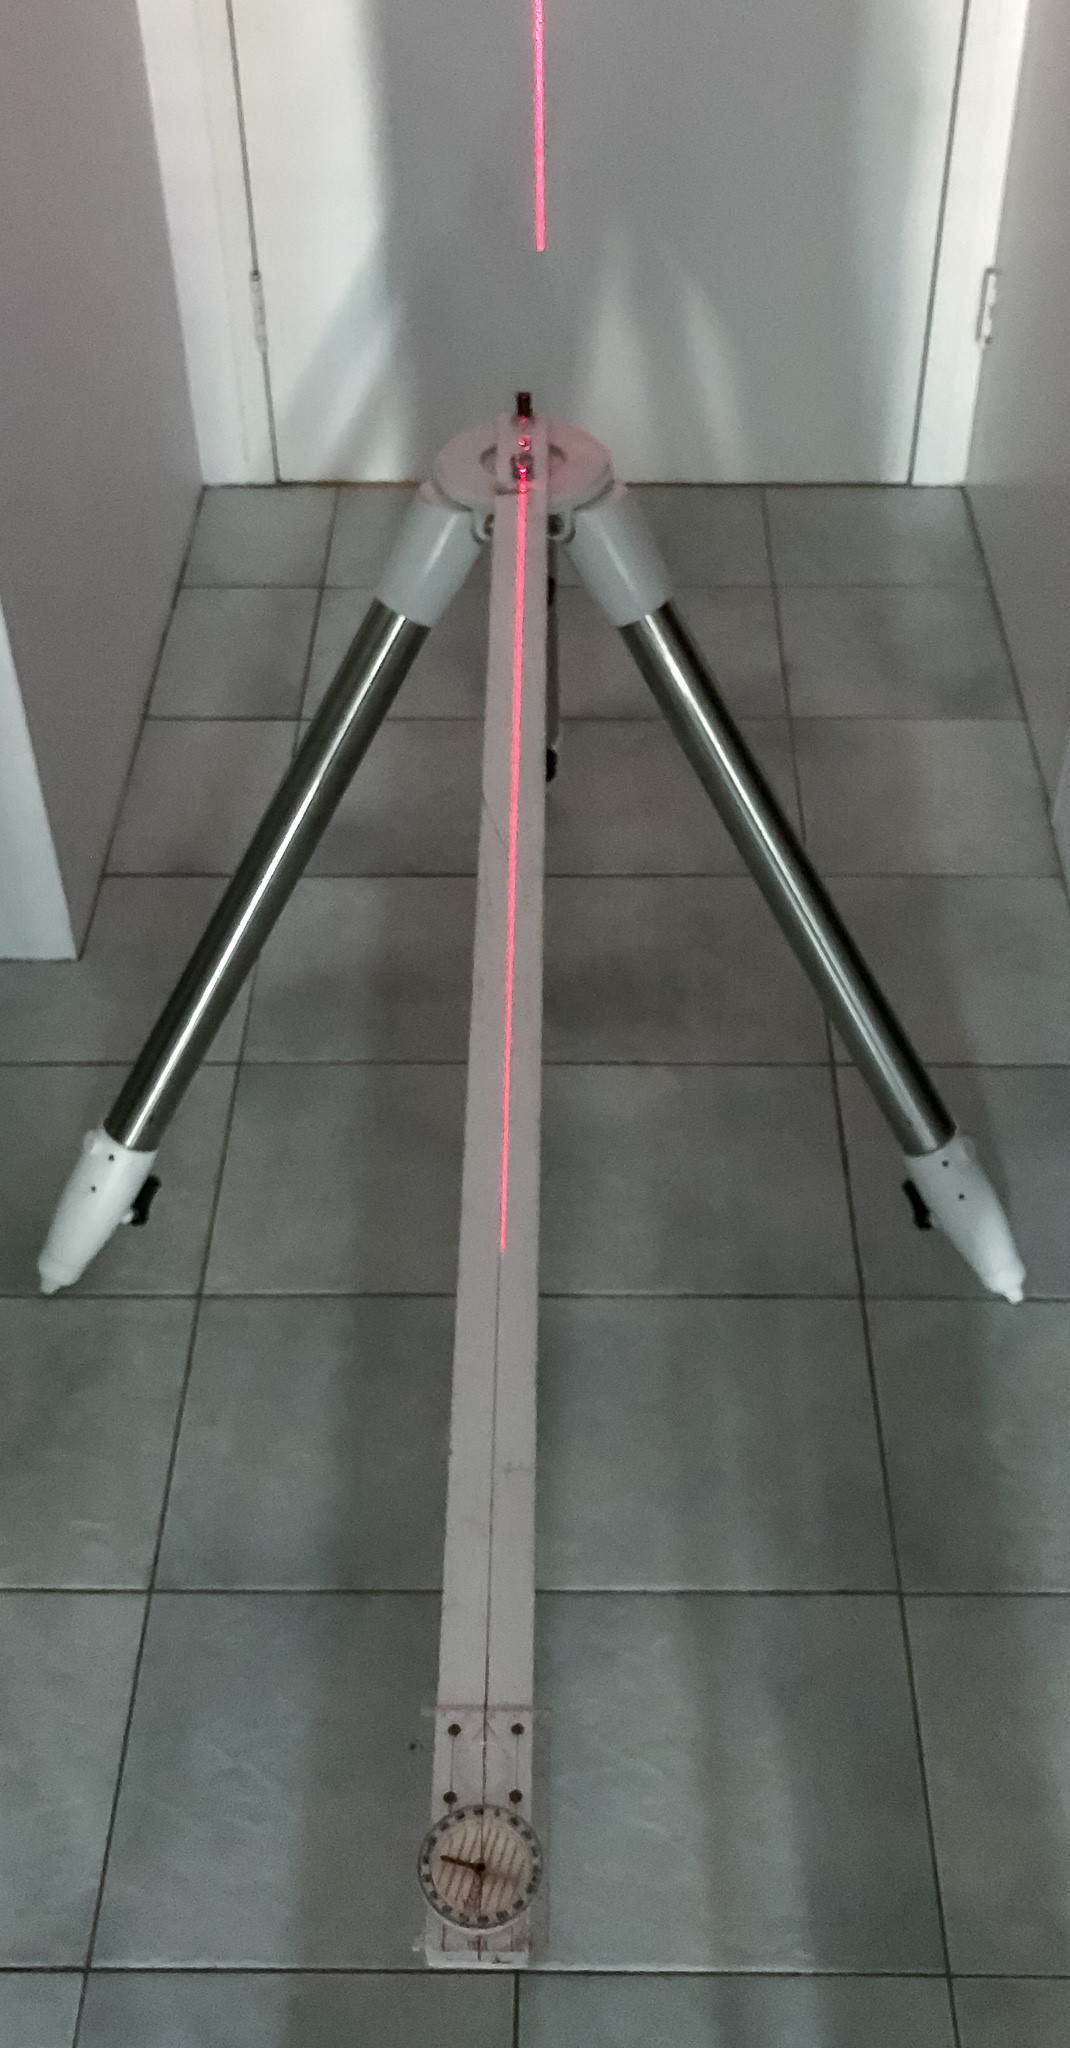 Positioning tripod ready for mount alignment